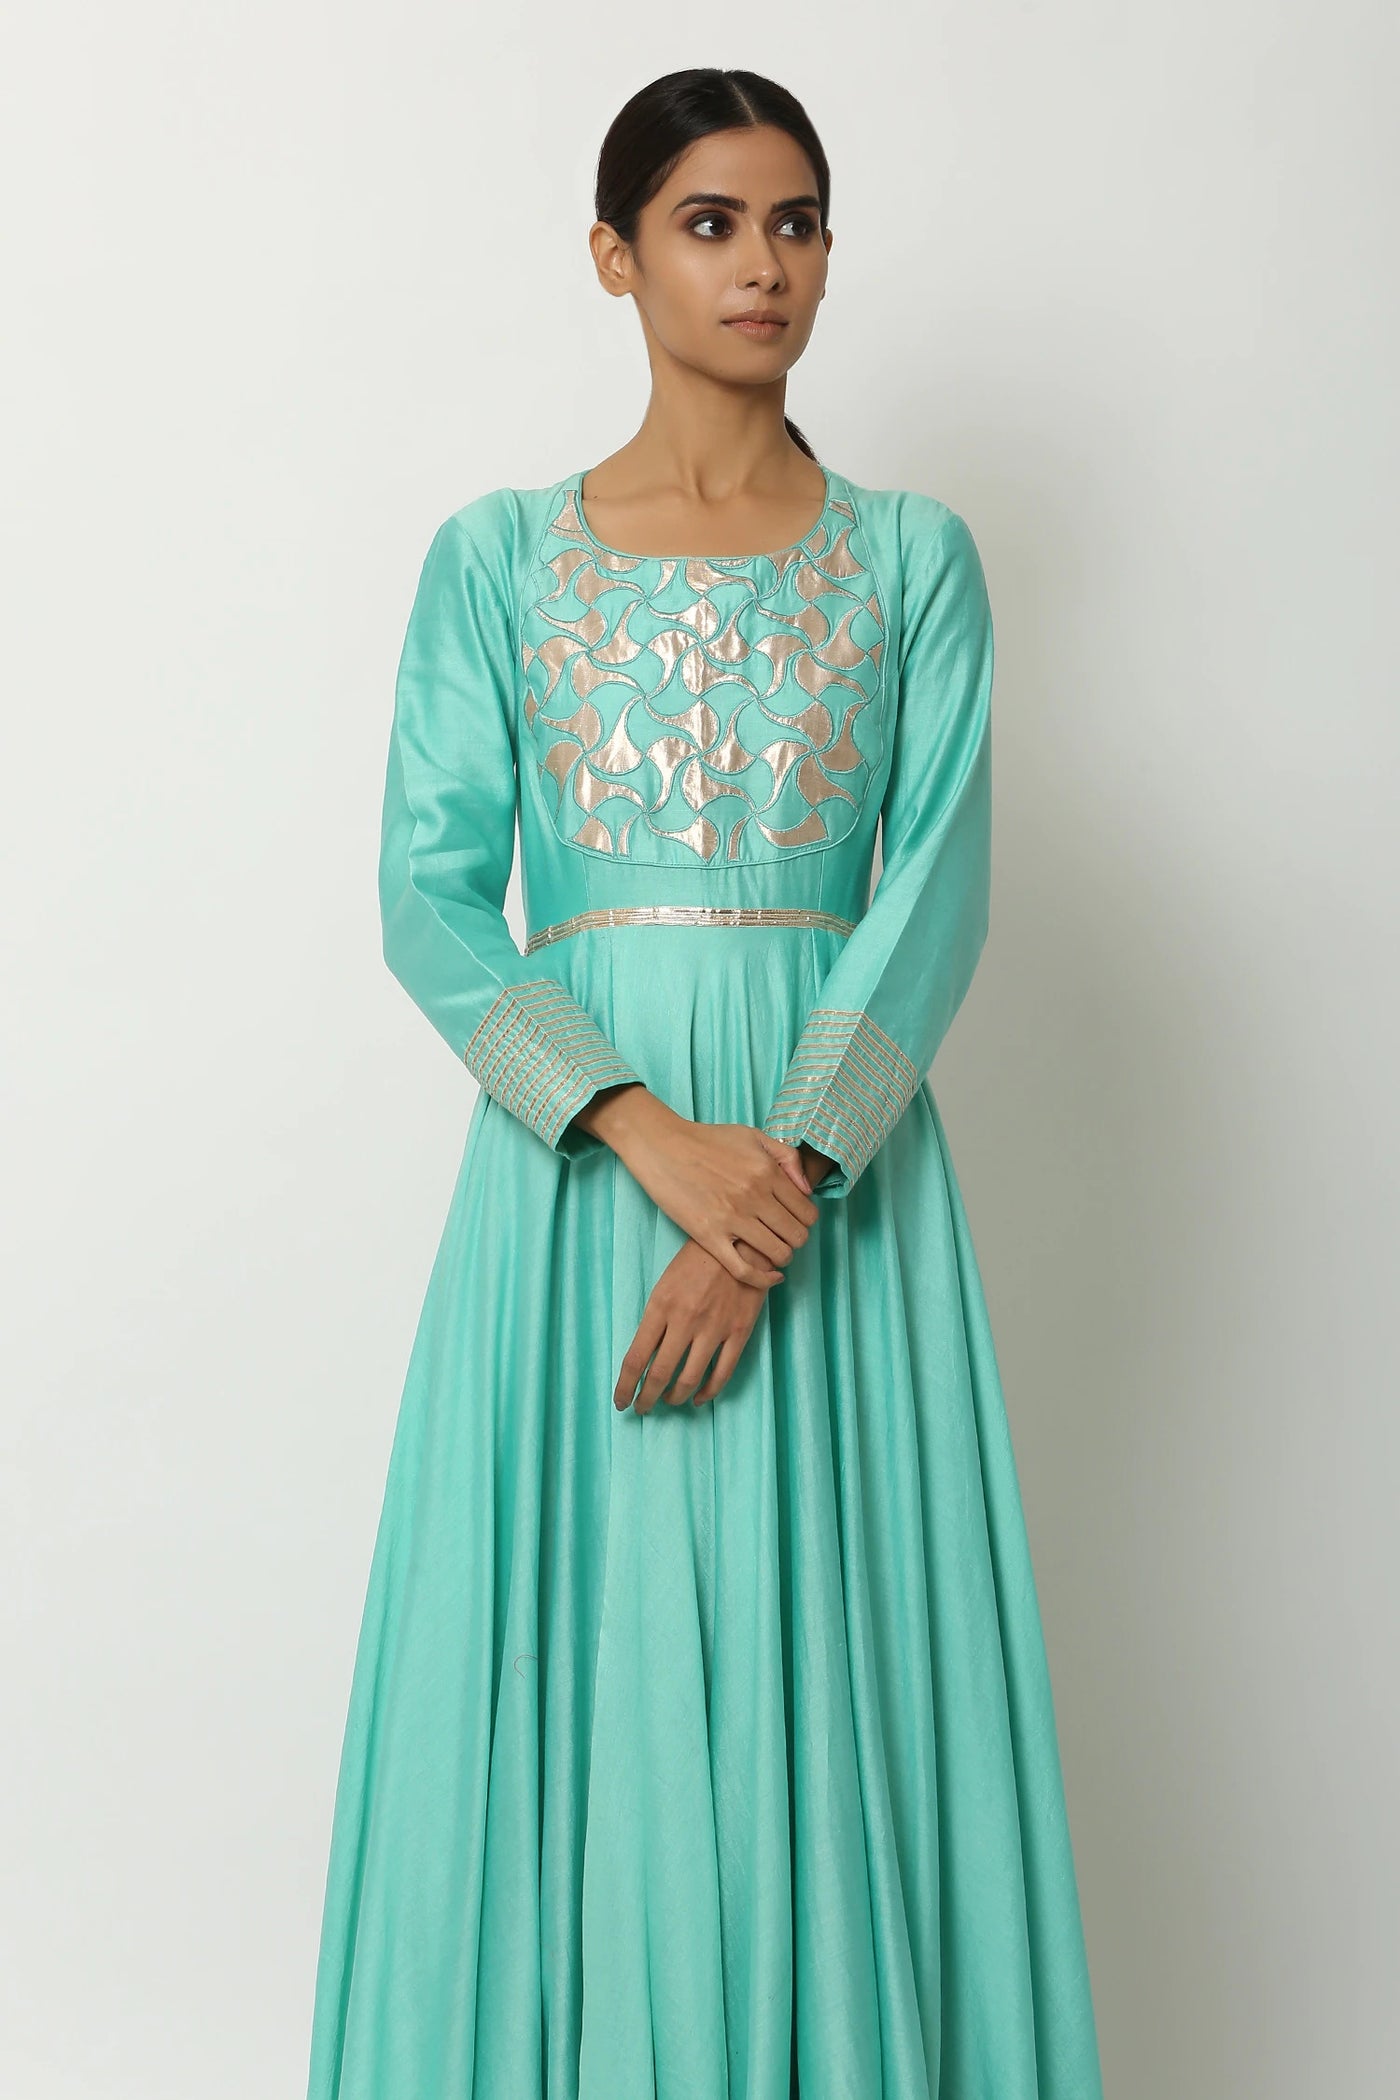 Green Chanderi Anarkali Set - Indian Clothing in Denver, CO, Aurora, CO, Boulder, CO, Fort Collins, CO, Colorado Springs, CO, Parker, CO, Highlands Ranch, CO, Cherry Creek, CO, Centennial, CO, and Longmont, CO. Nationwide shipping USA - India Fashion X